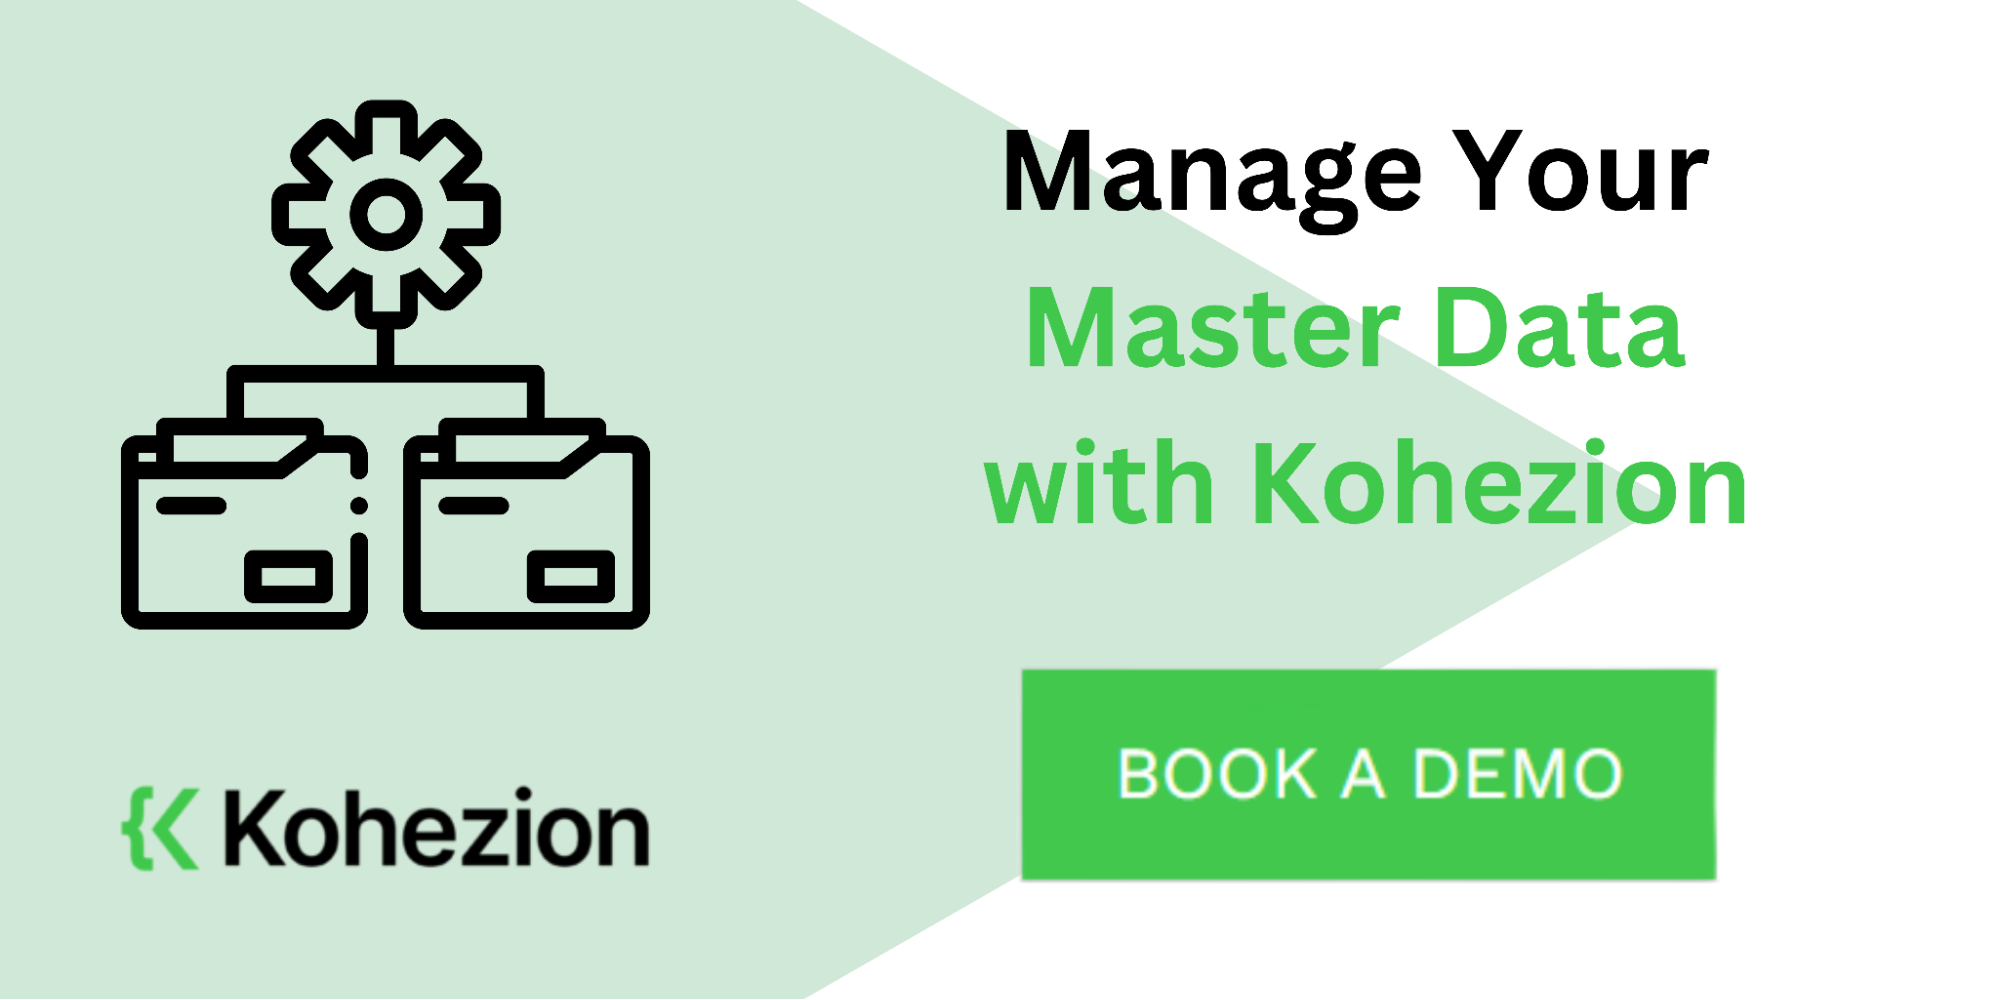 manage your master data with kohezion